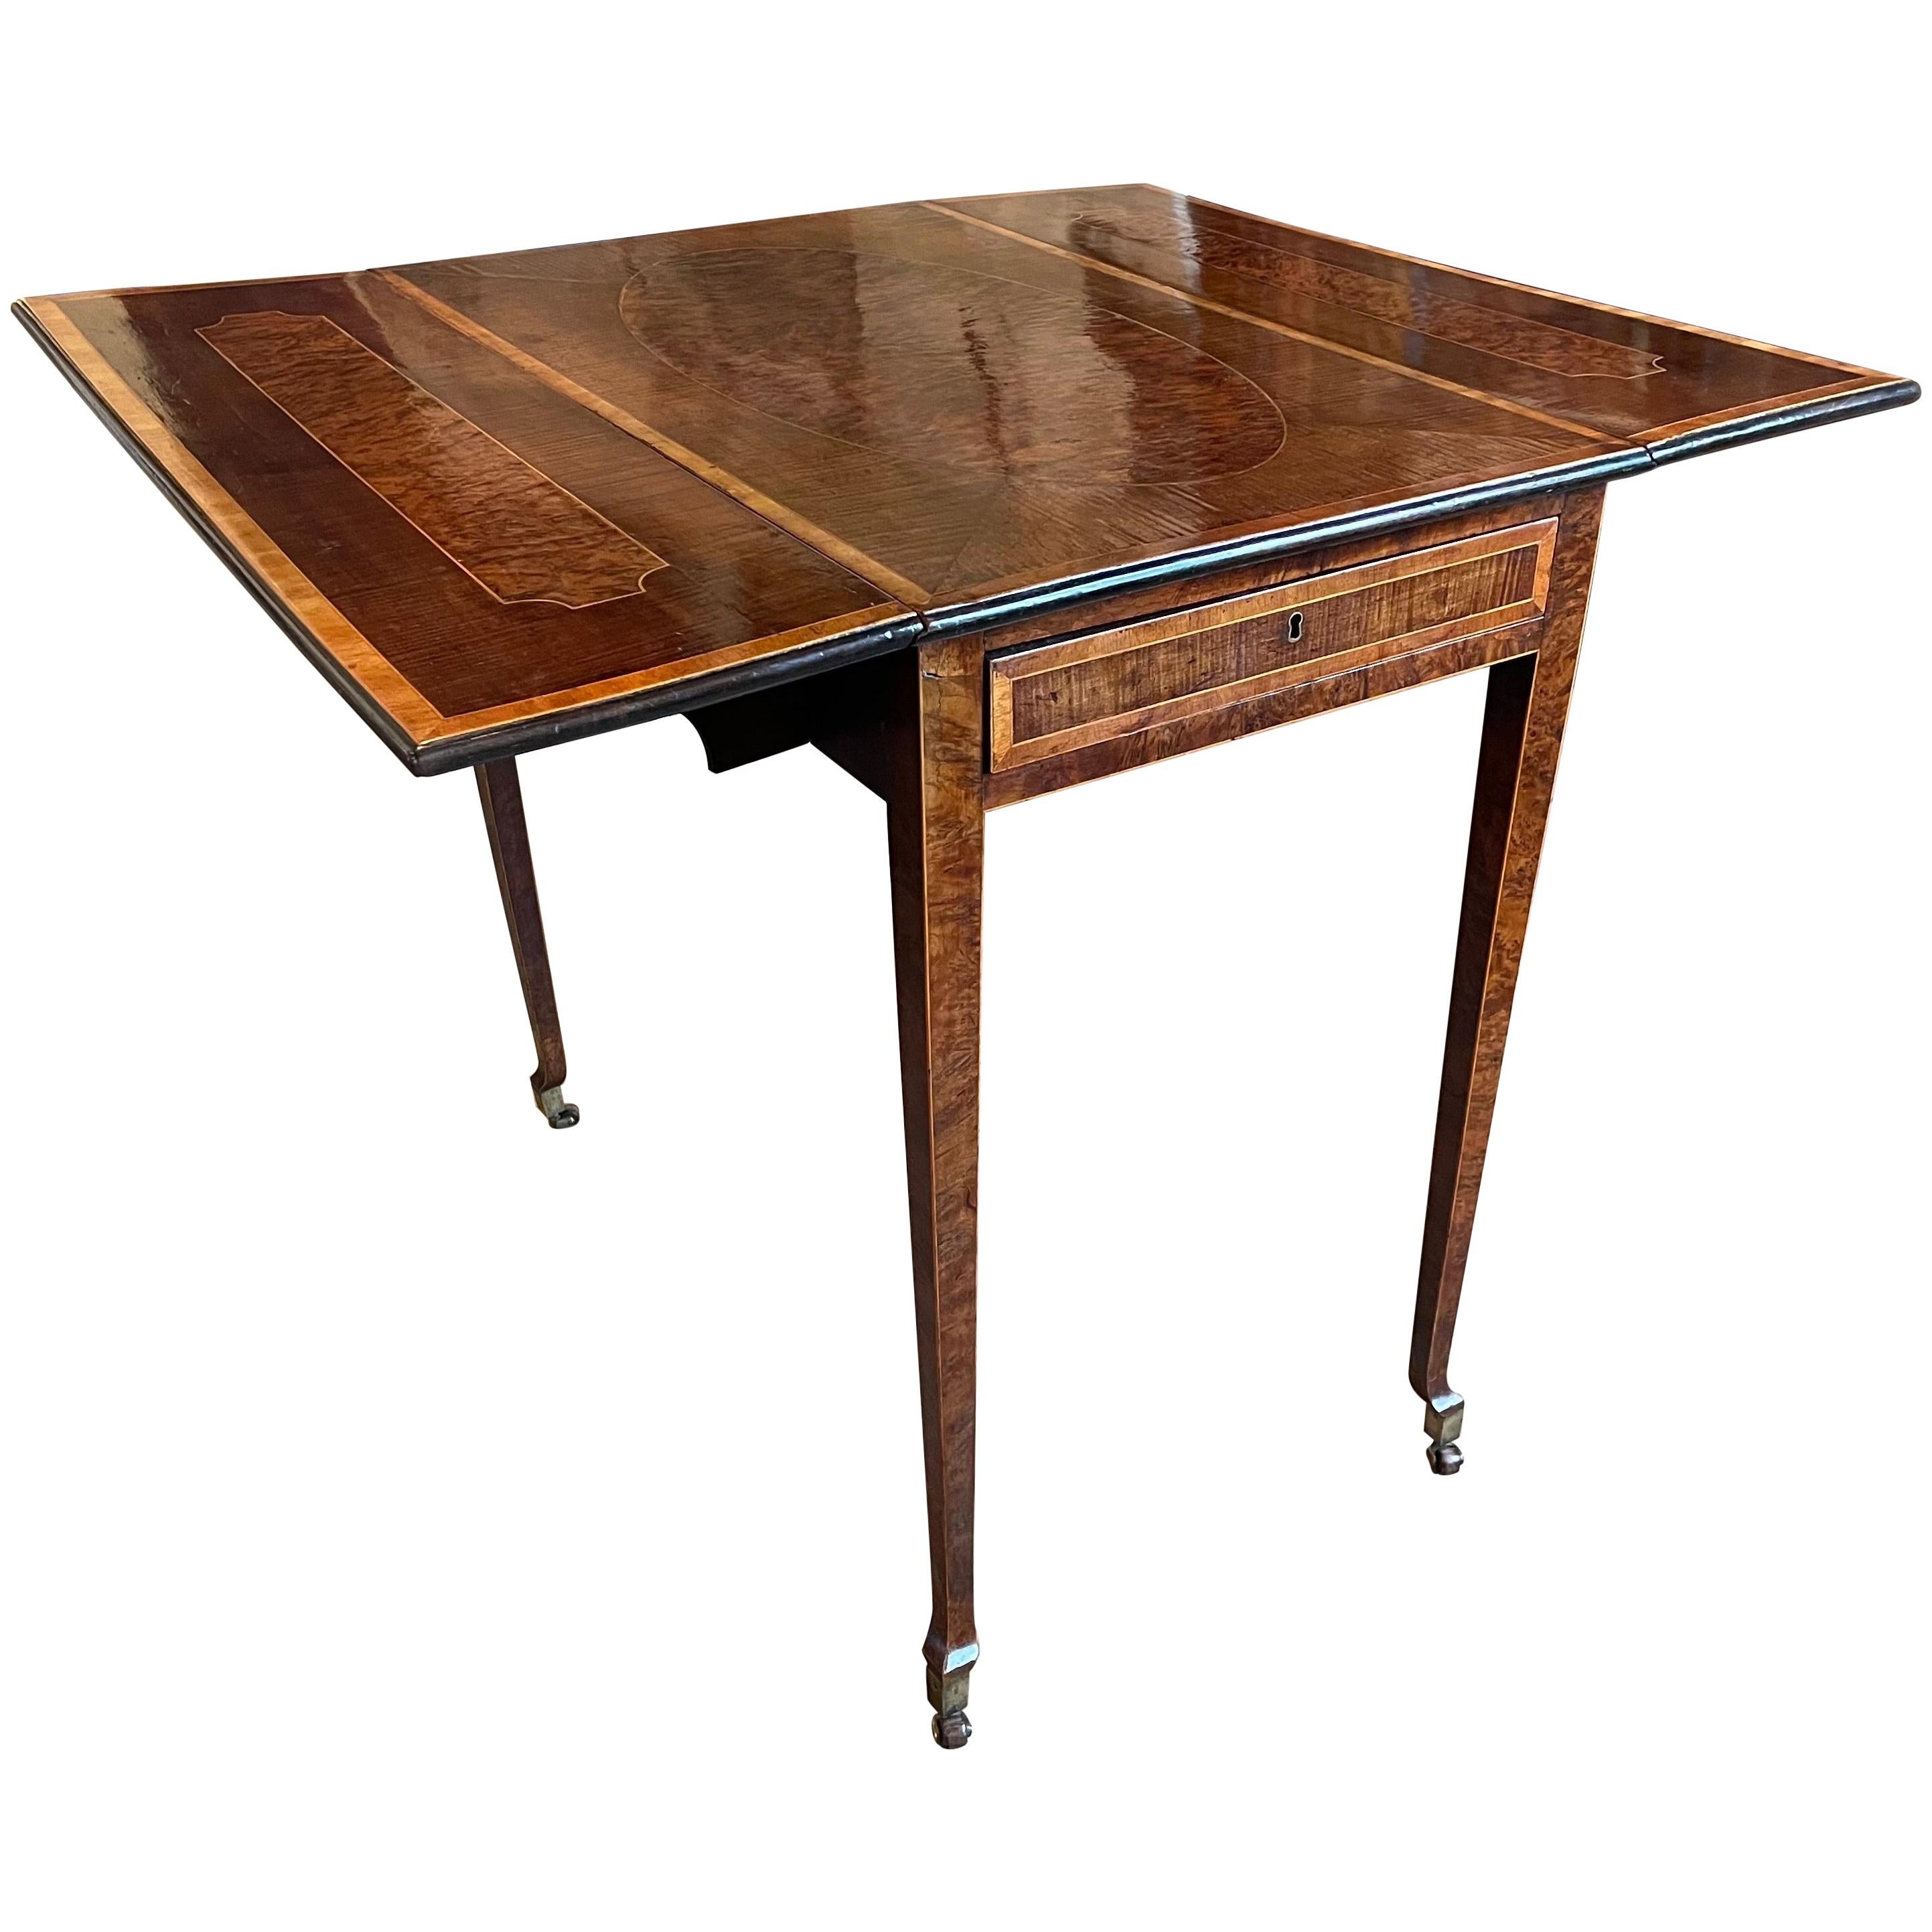 Harewood and Burr Yew Pembroke Table Attributed to Henry Kettle